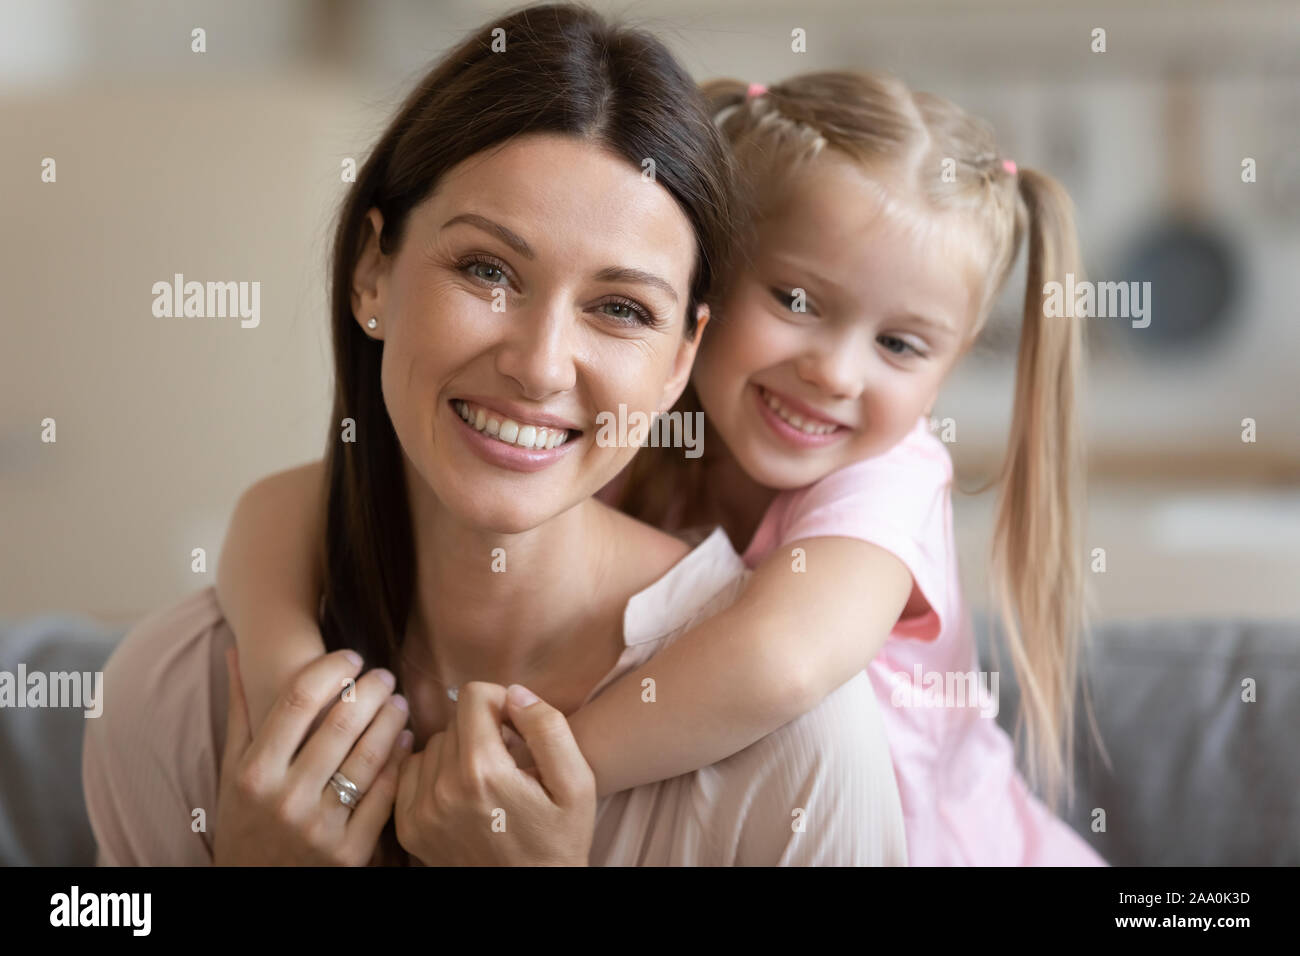 Smiling preschool girl cuddling from back happy young mother. Stock Photo